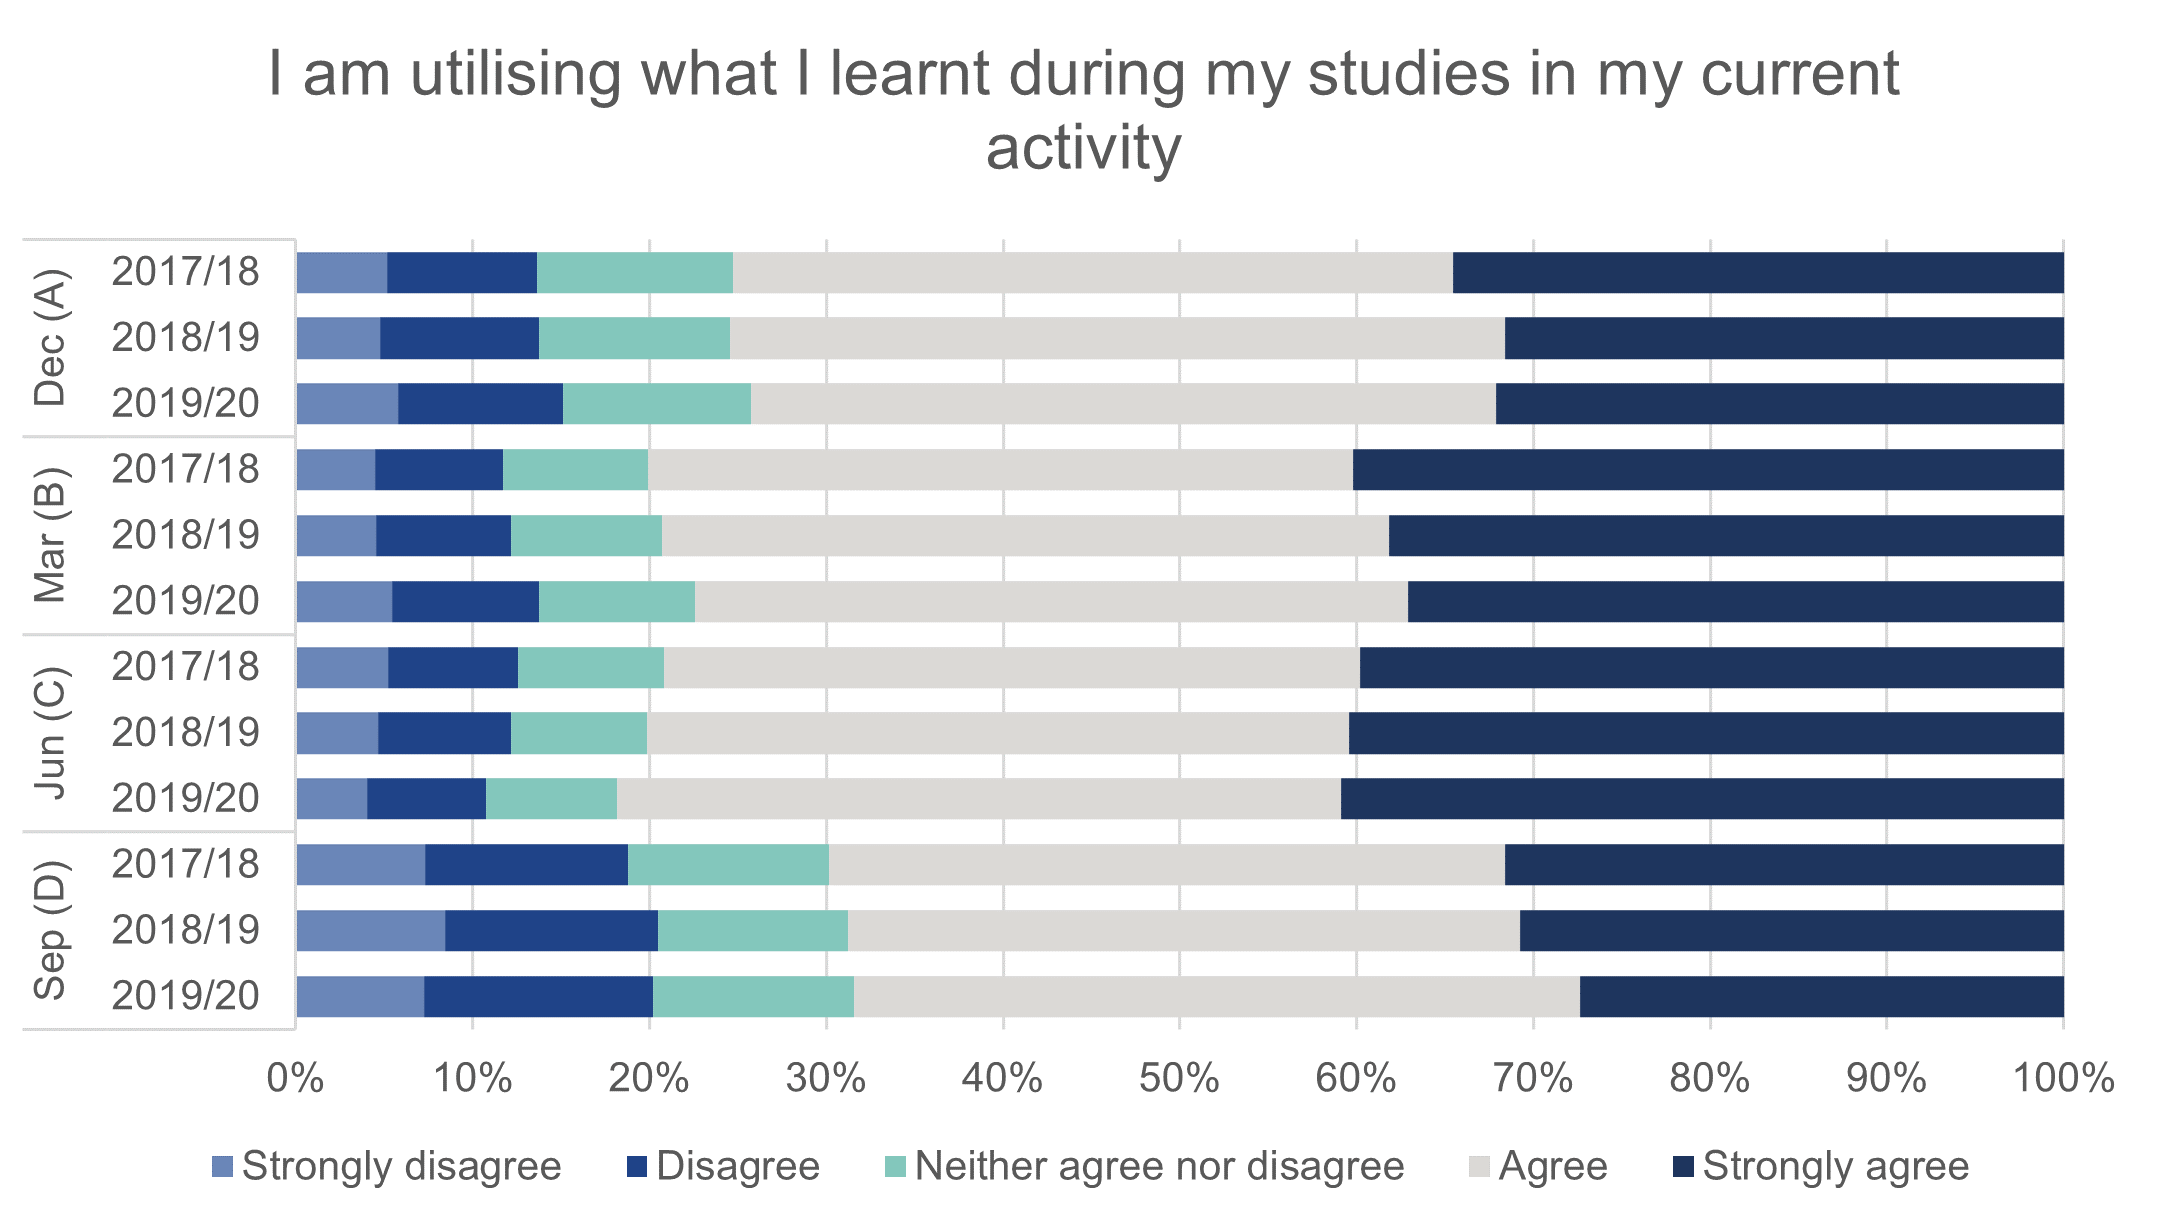 Stacked bar chart showing proportions of graduates agreeing with statement. Trends described in text.